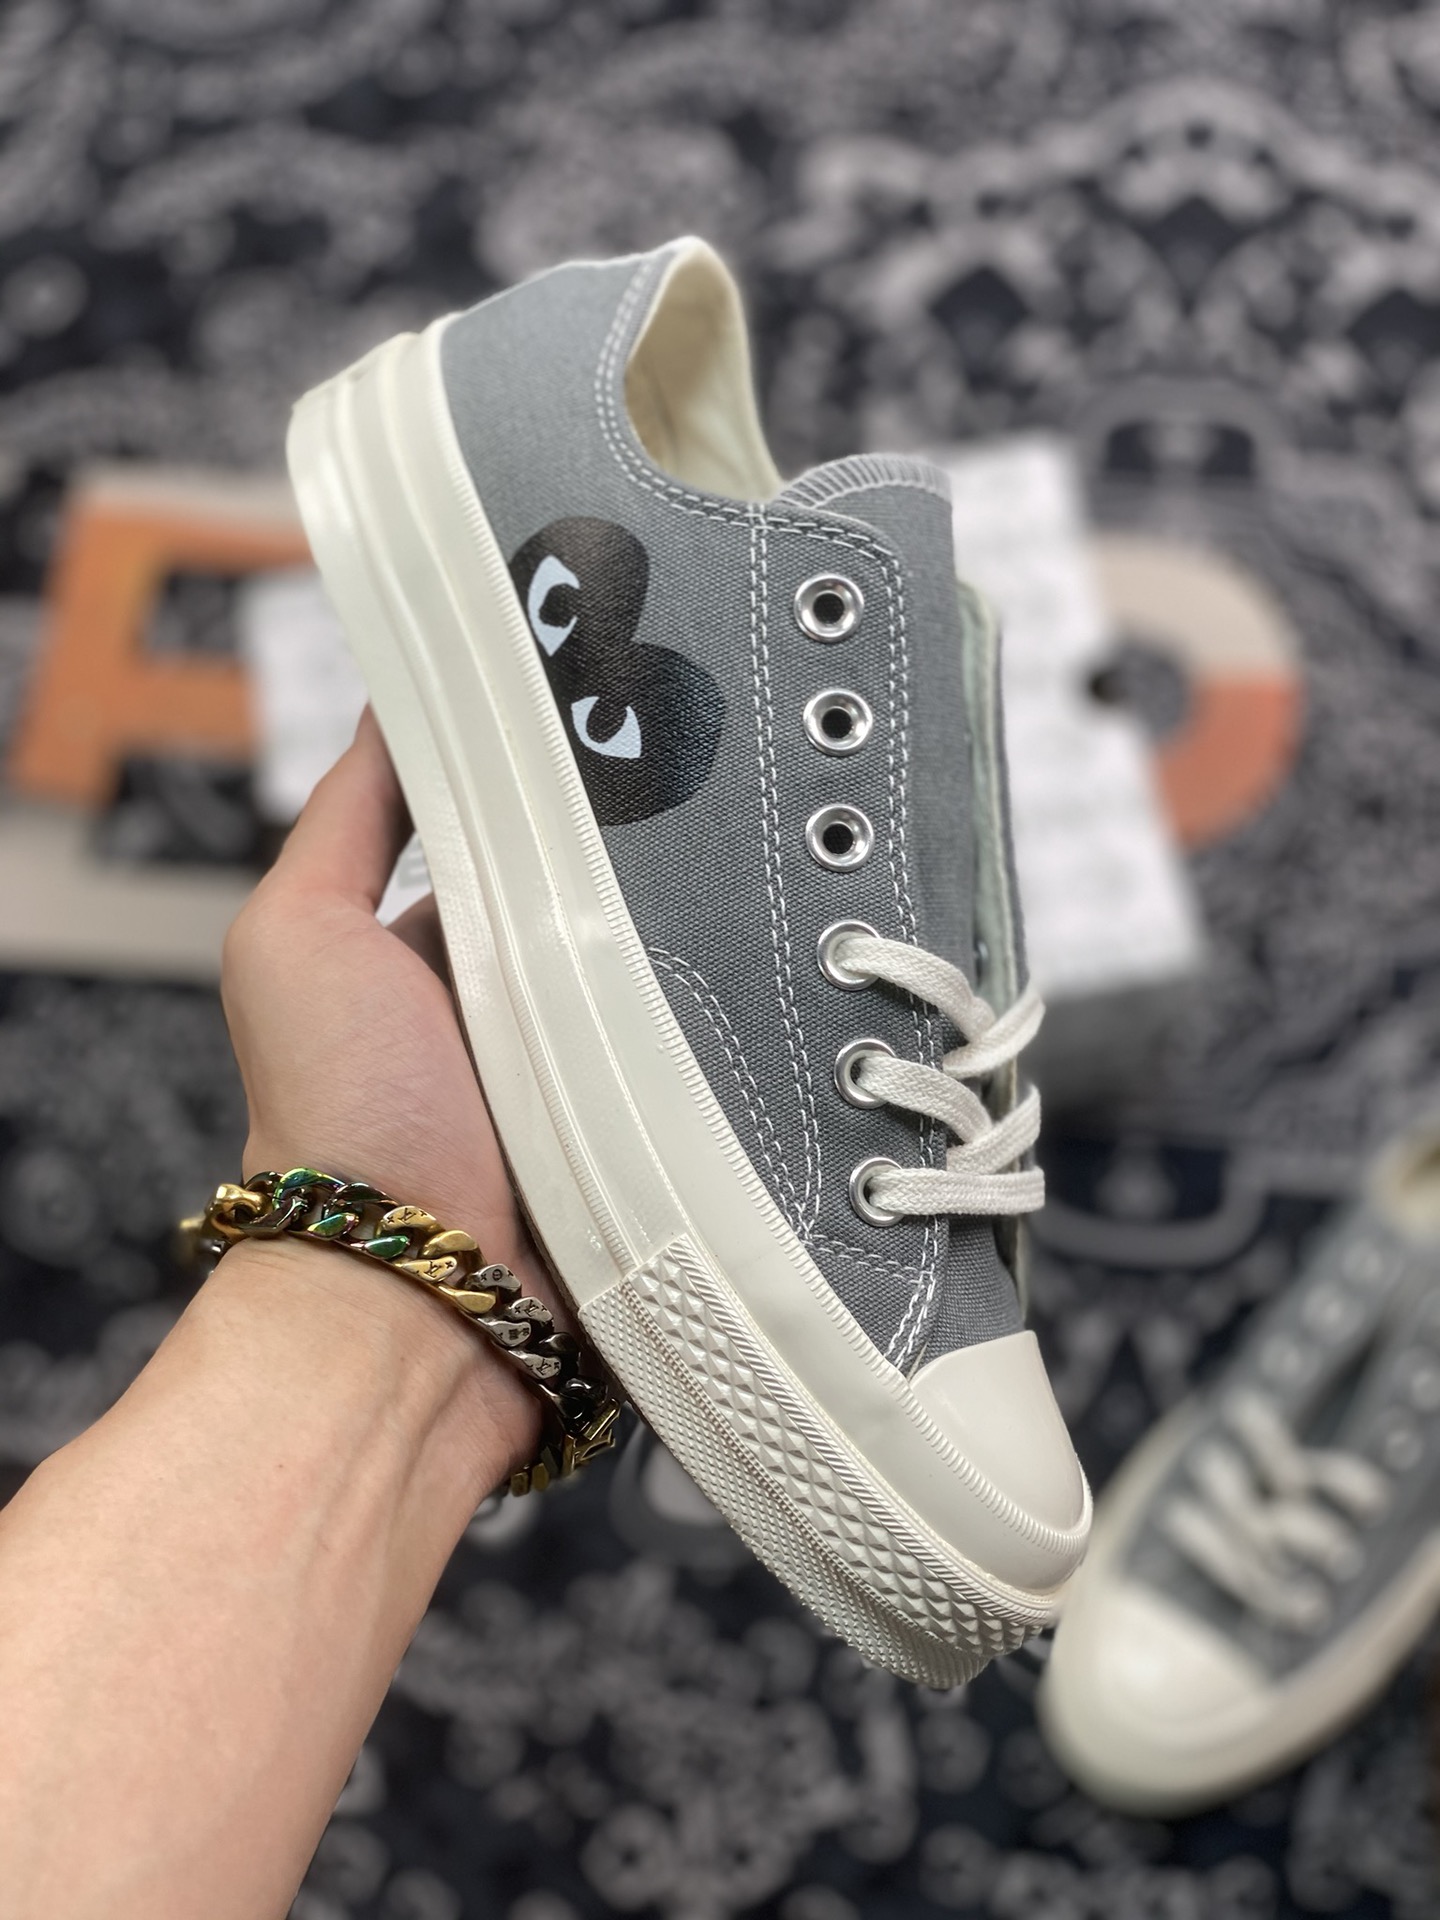 converse all star low sale